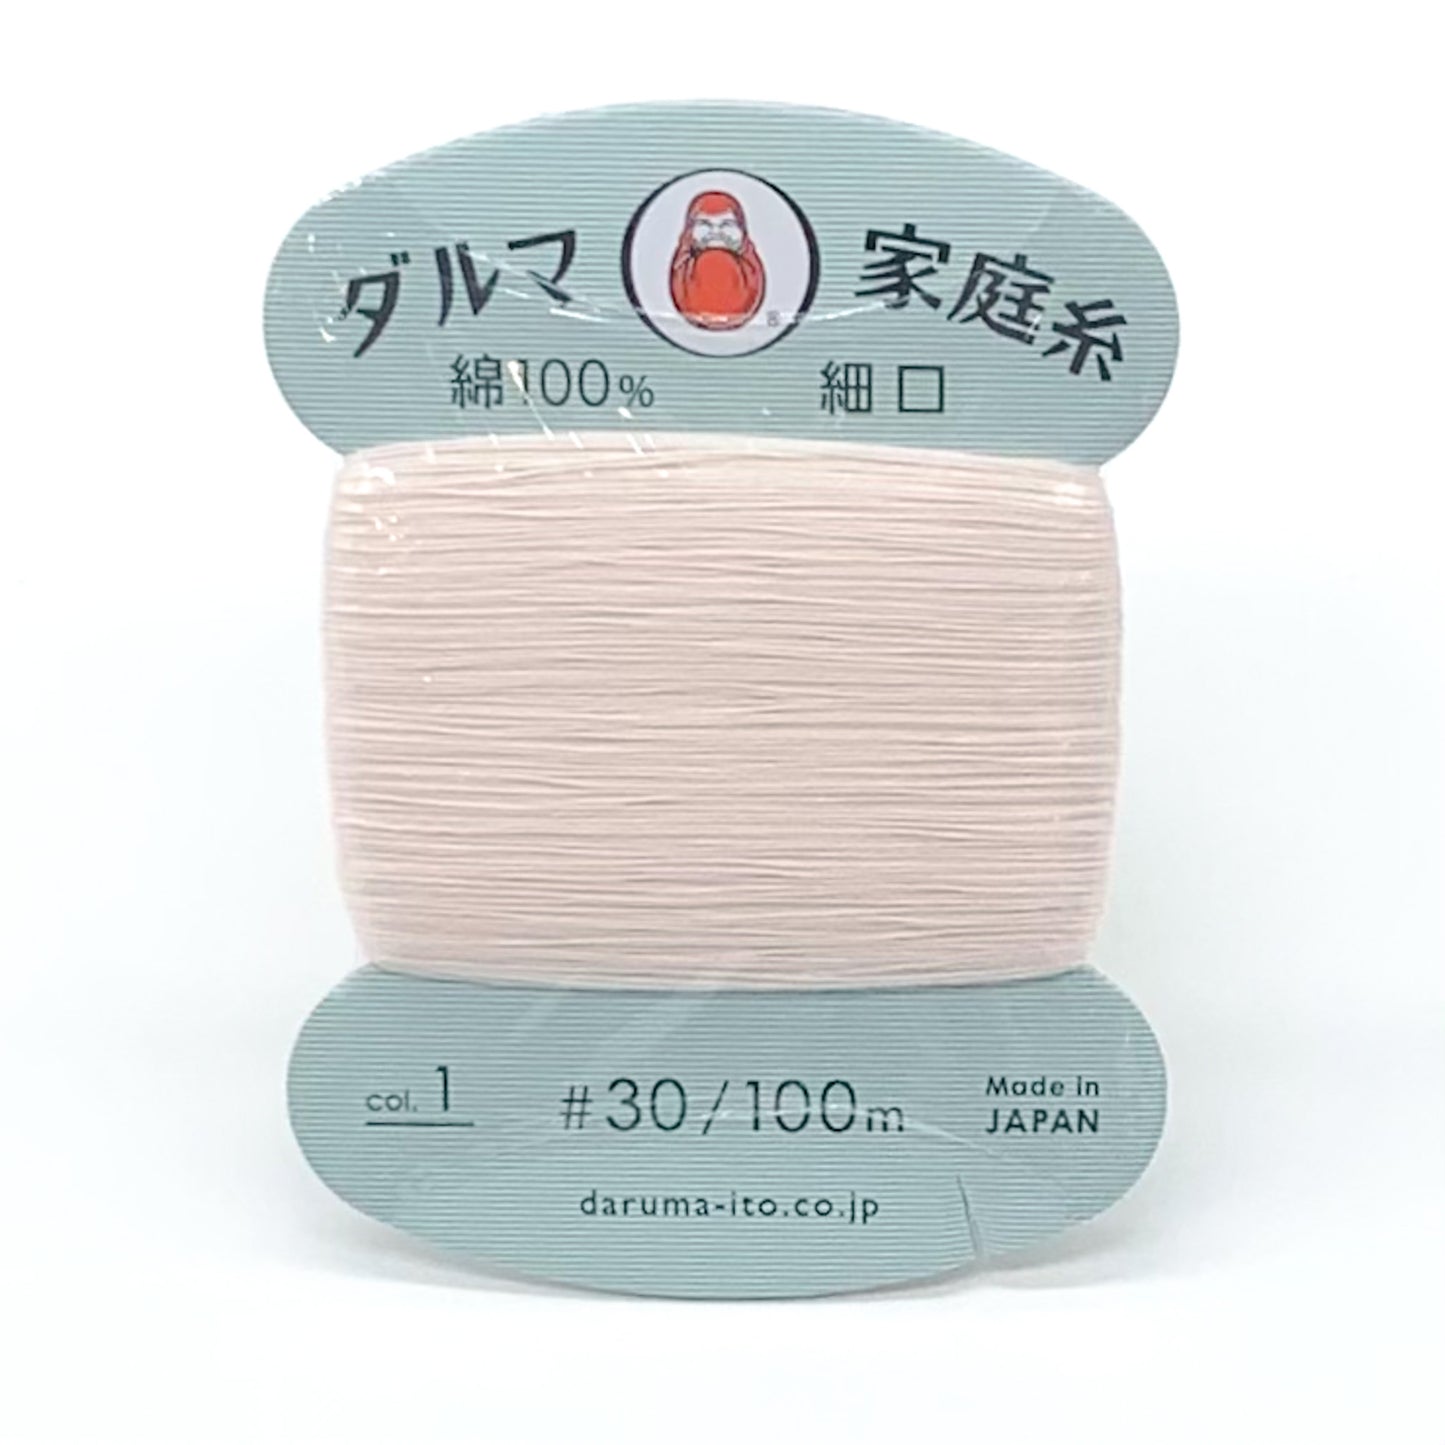 Hand Sewing Thread - Assorted Colours